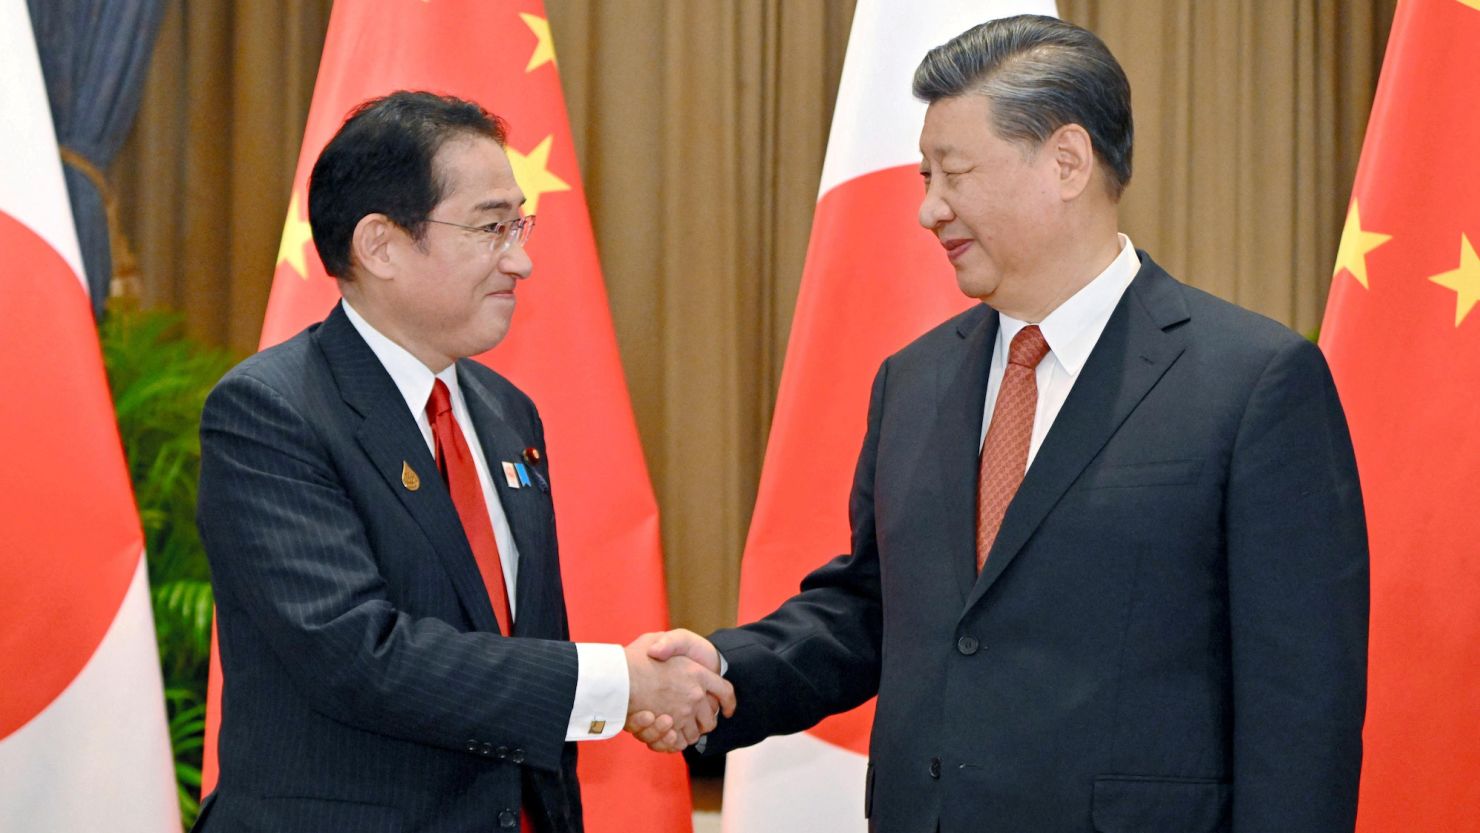 Japanese Prime Minister Fumio Kishida meets Chinese leader Xi Jinping on the sidelines of the Asia-Pacific Economic Cooperation (APEC) summit in Bangkok on November 17, 2022.